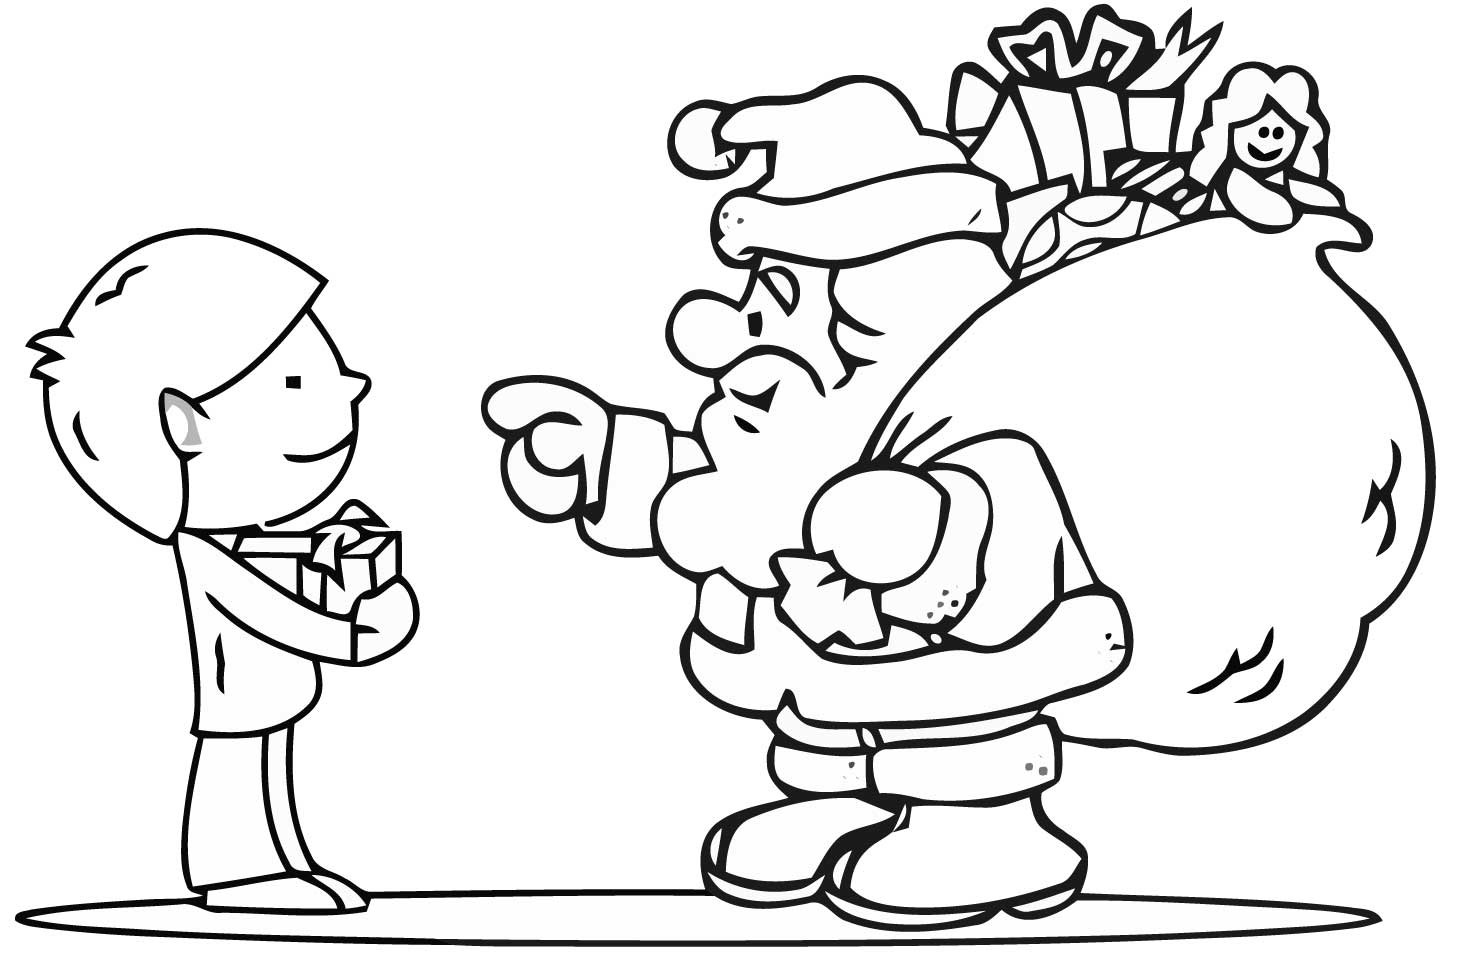 Kids Christmas Coloring Book
 Free Christmas Colouring Pages For Children